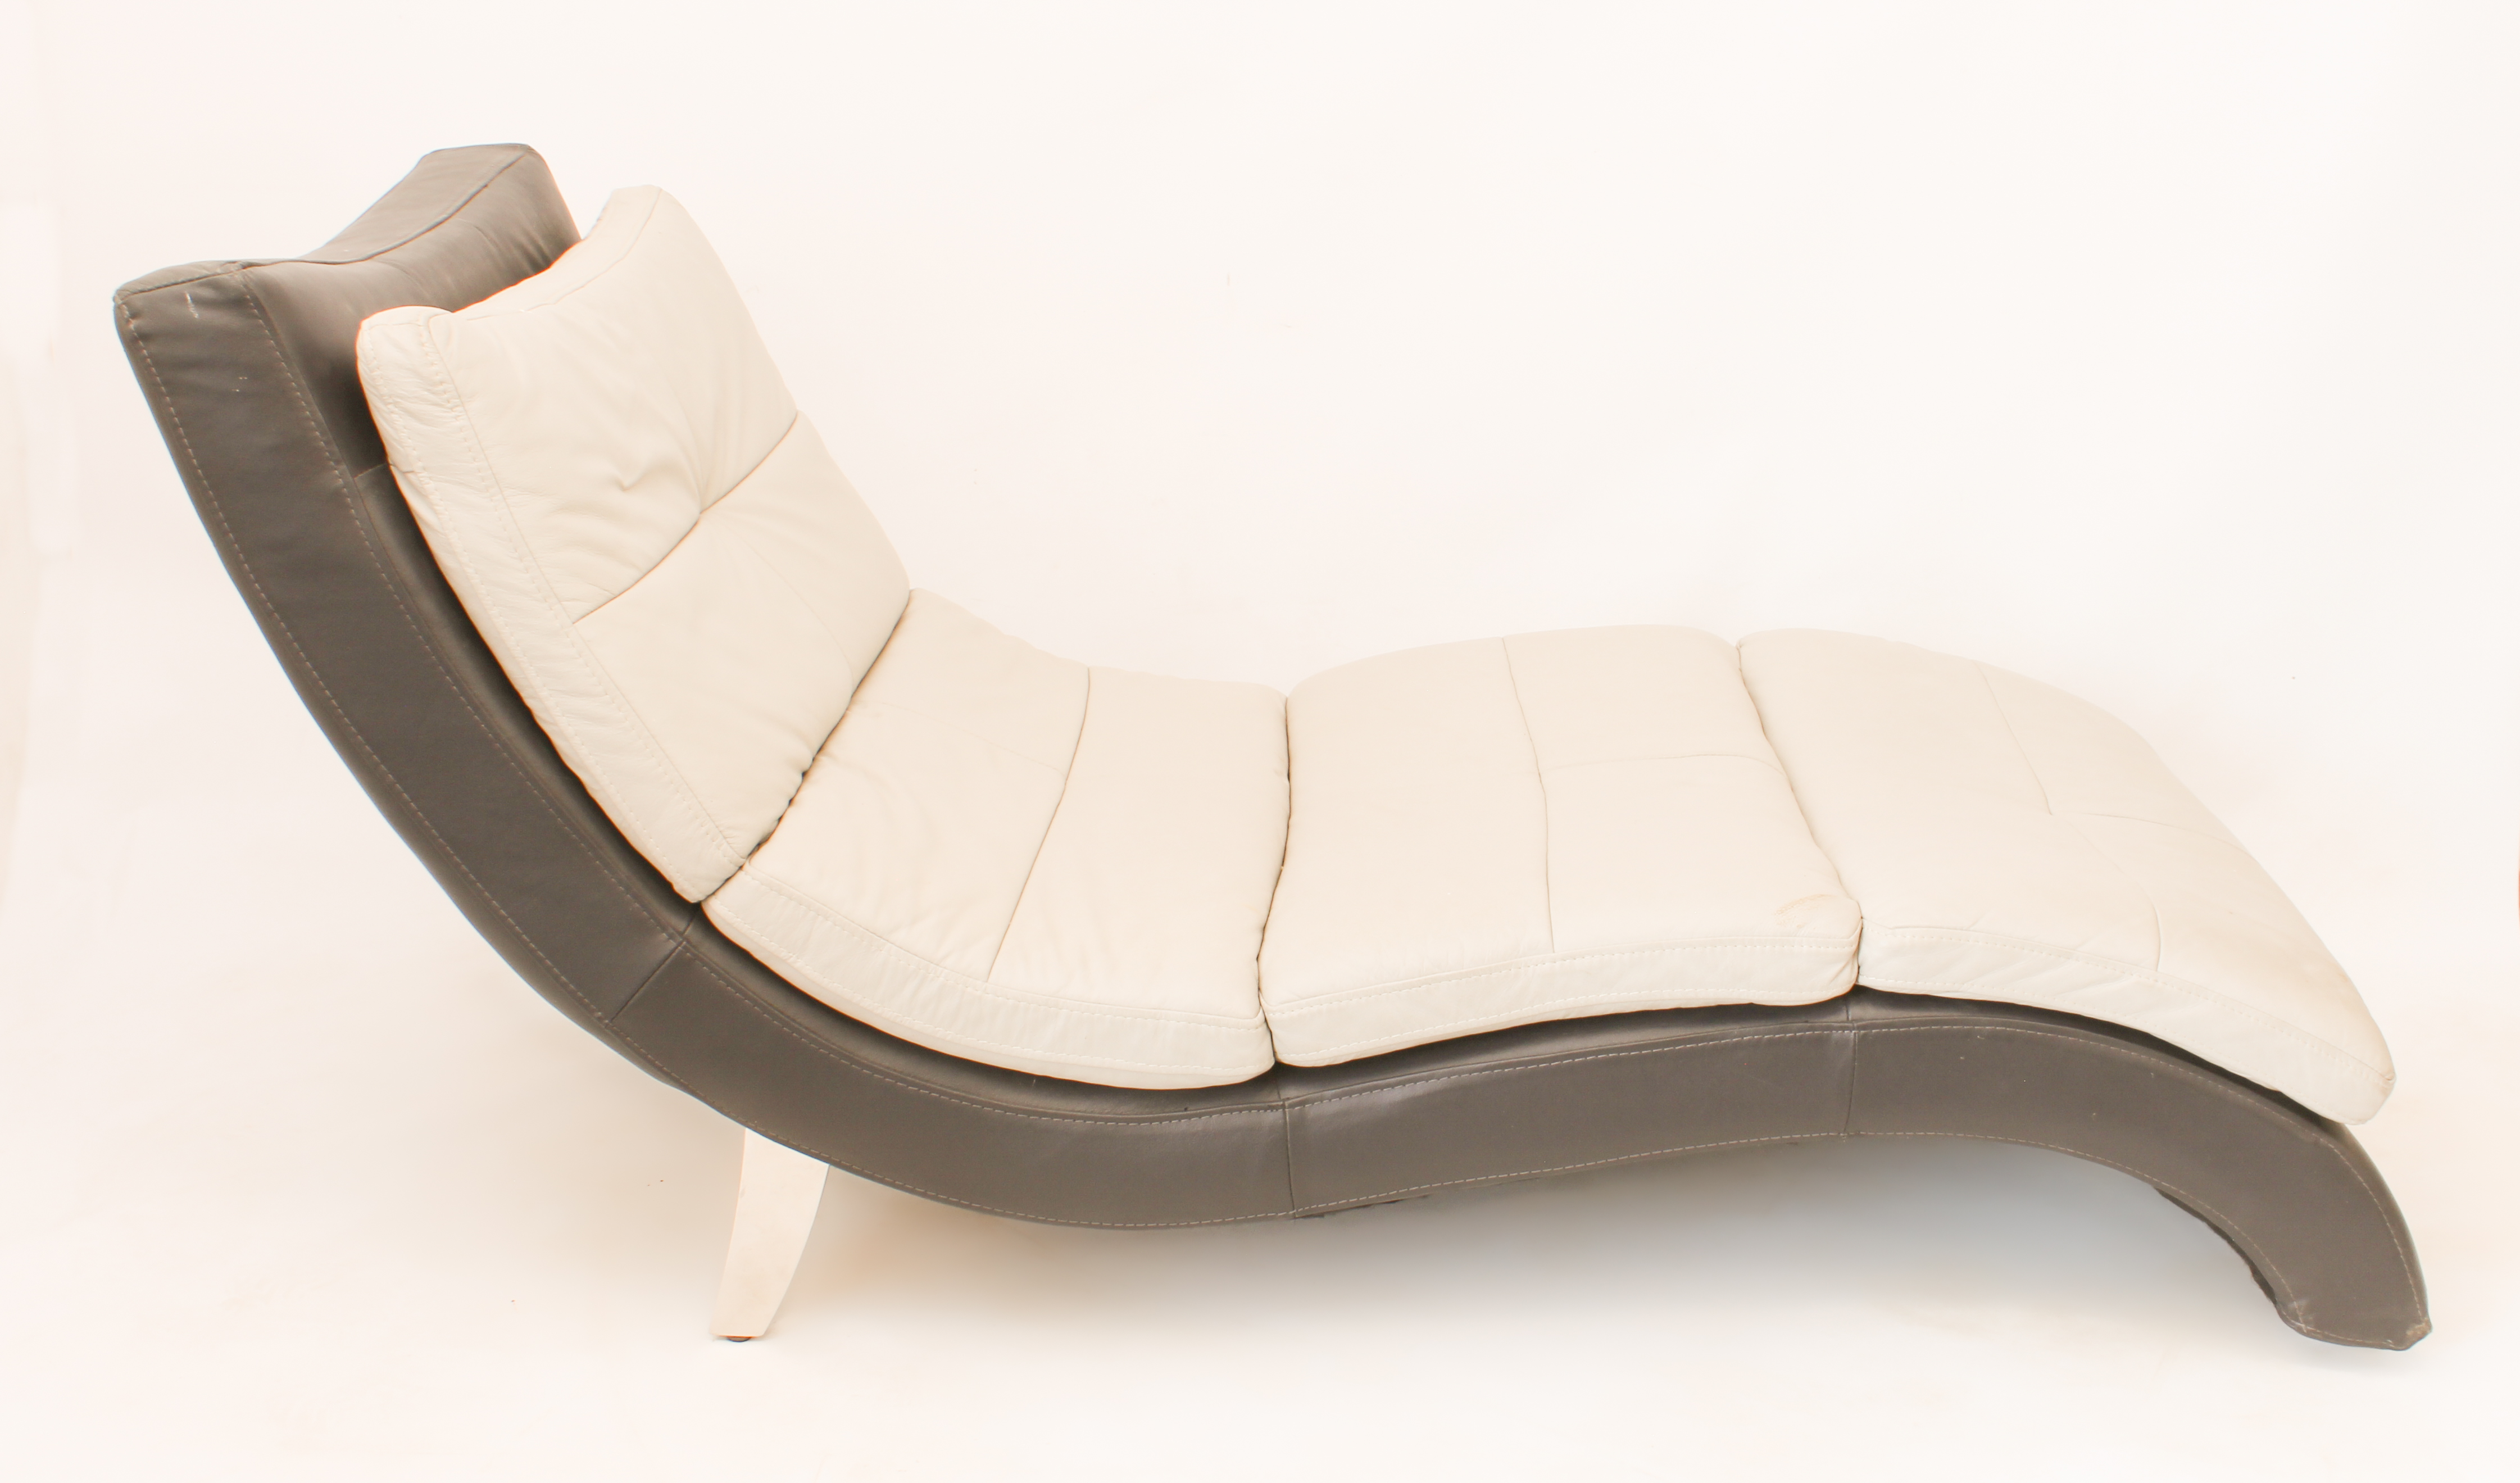 A retro 1980s-90s two-tone grey leather chaise longue or day bed - raised on angular chrome legs. (